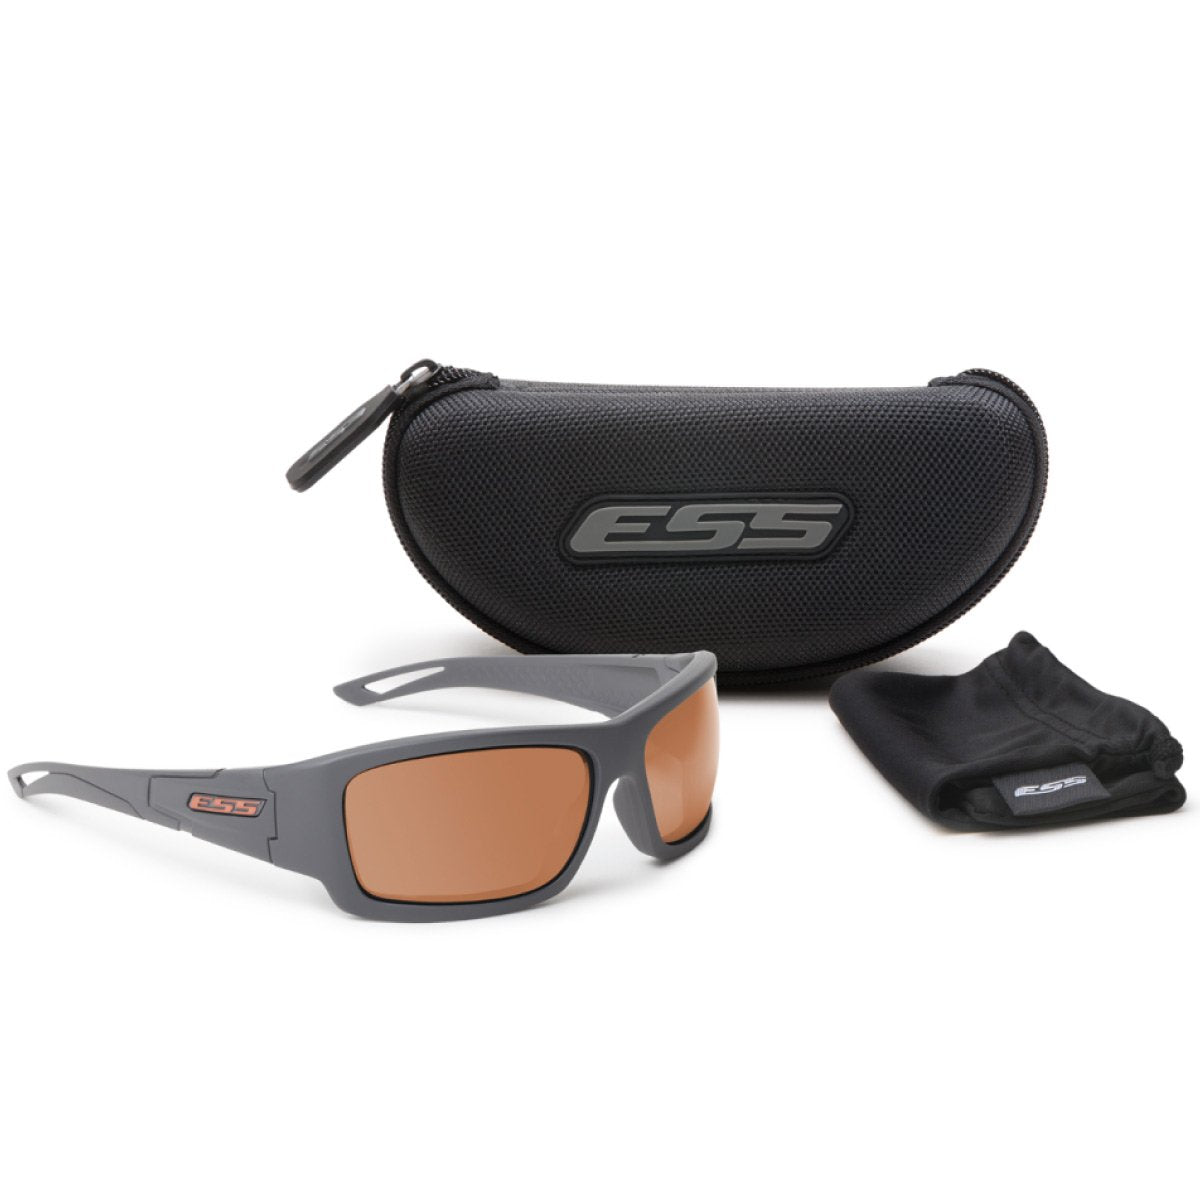 ESS Credence Sunglasses Gray Frame Mirrored Copper Lens Eyewear Eye Safety Systems Tactical Gear Supplier Tactical Distributors Australia